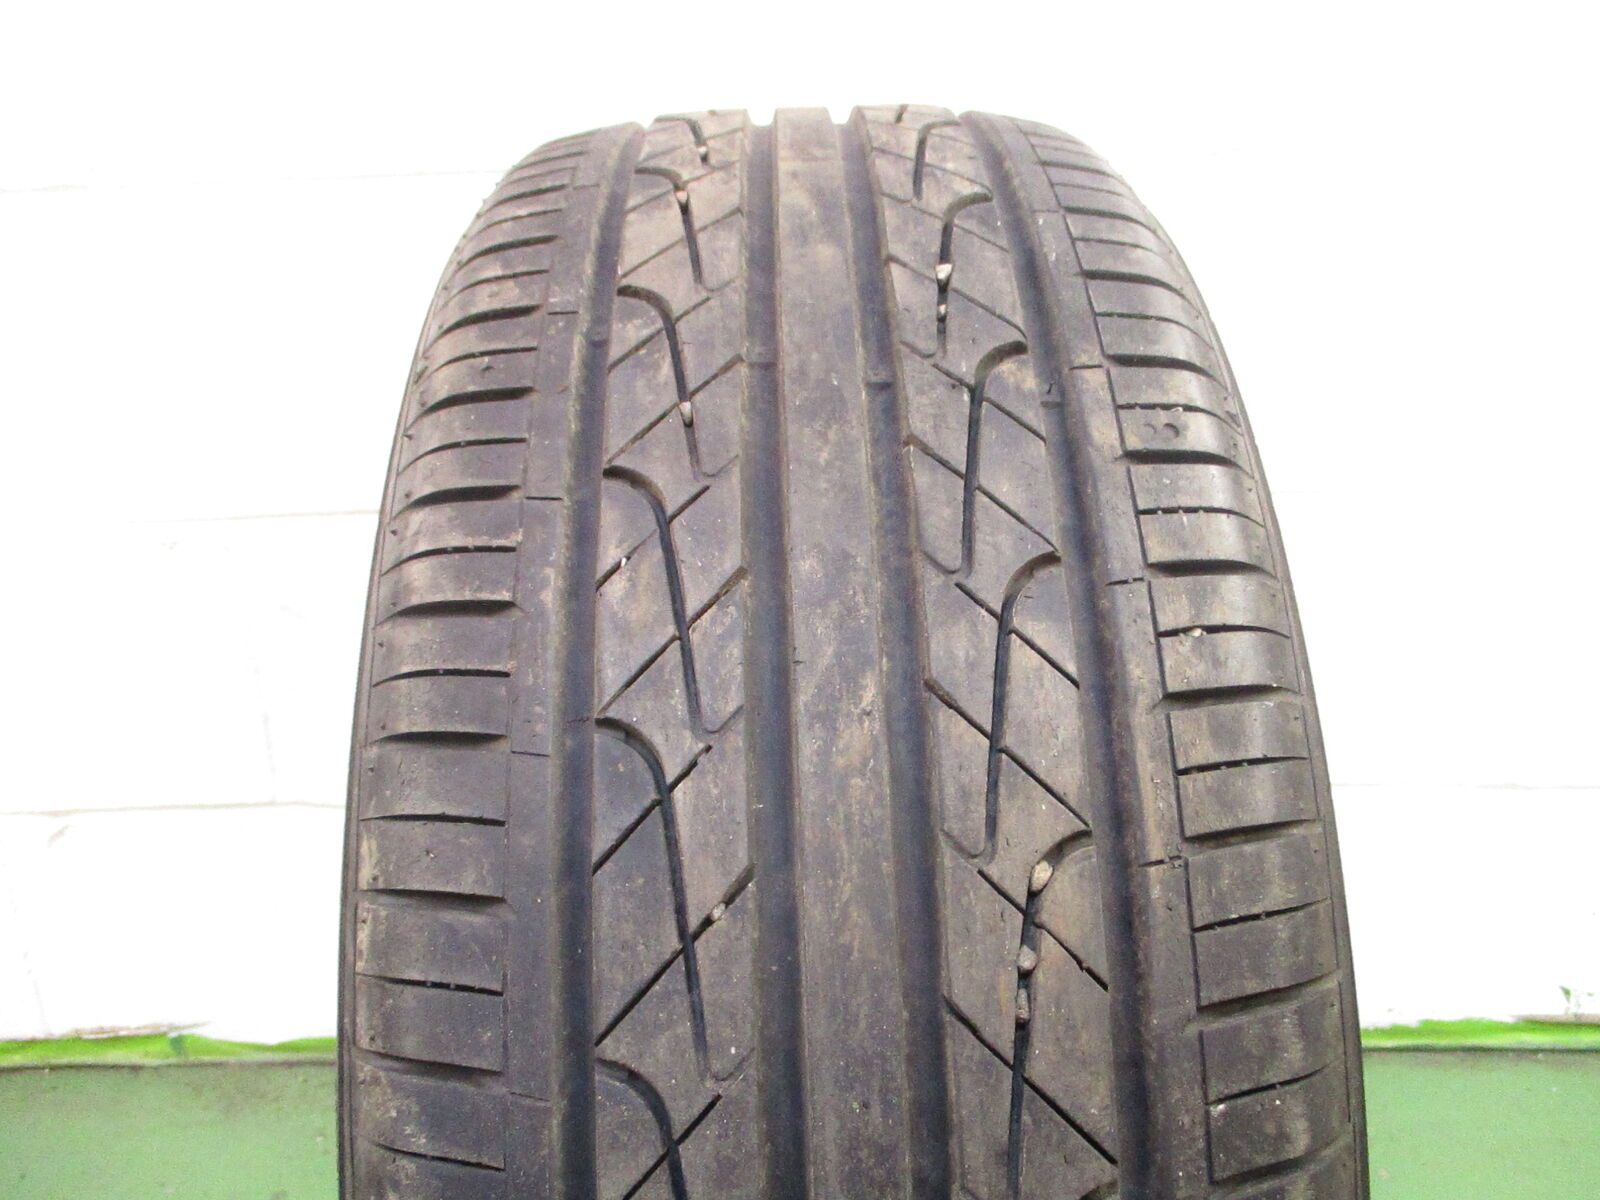 P215/55R16 Hankook Ventus V2 Concept 2 97 V Used 7/32nds